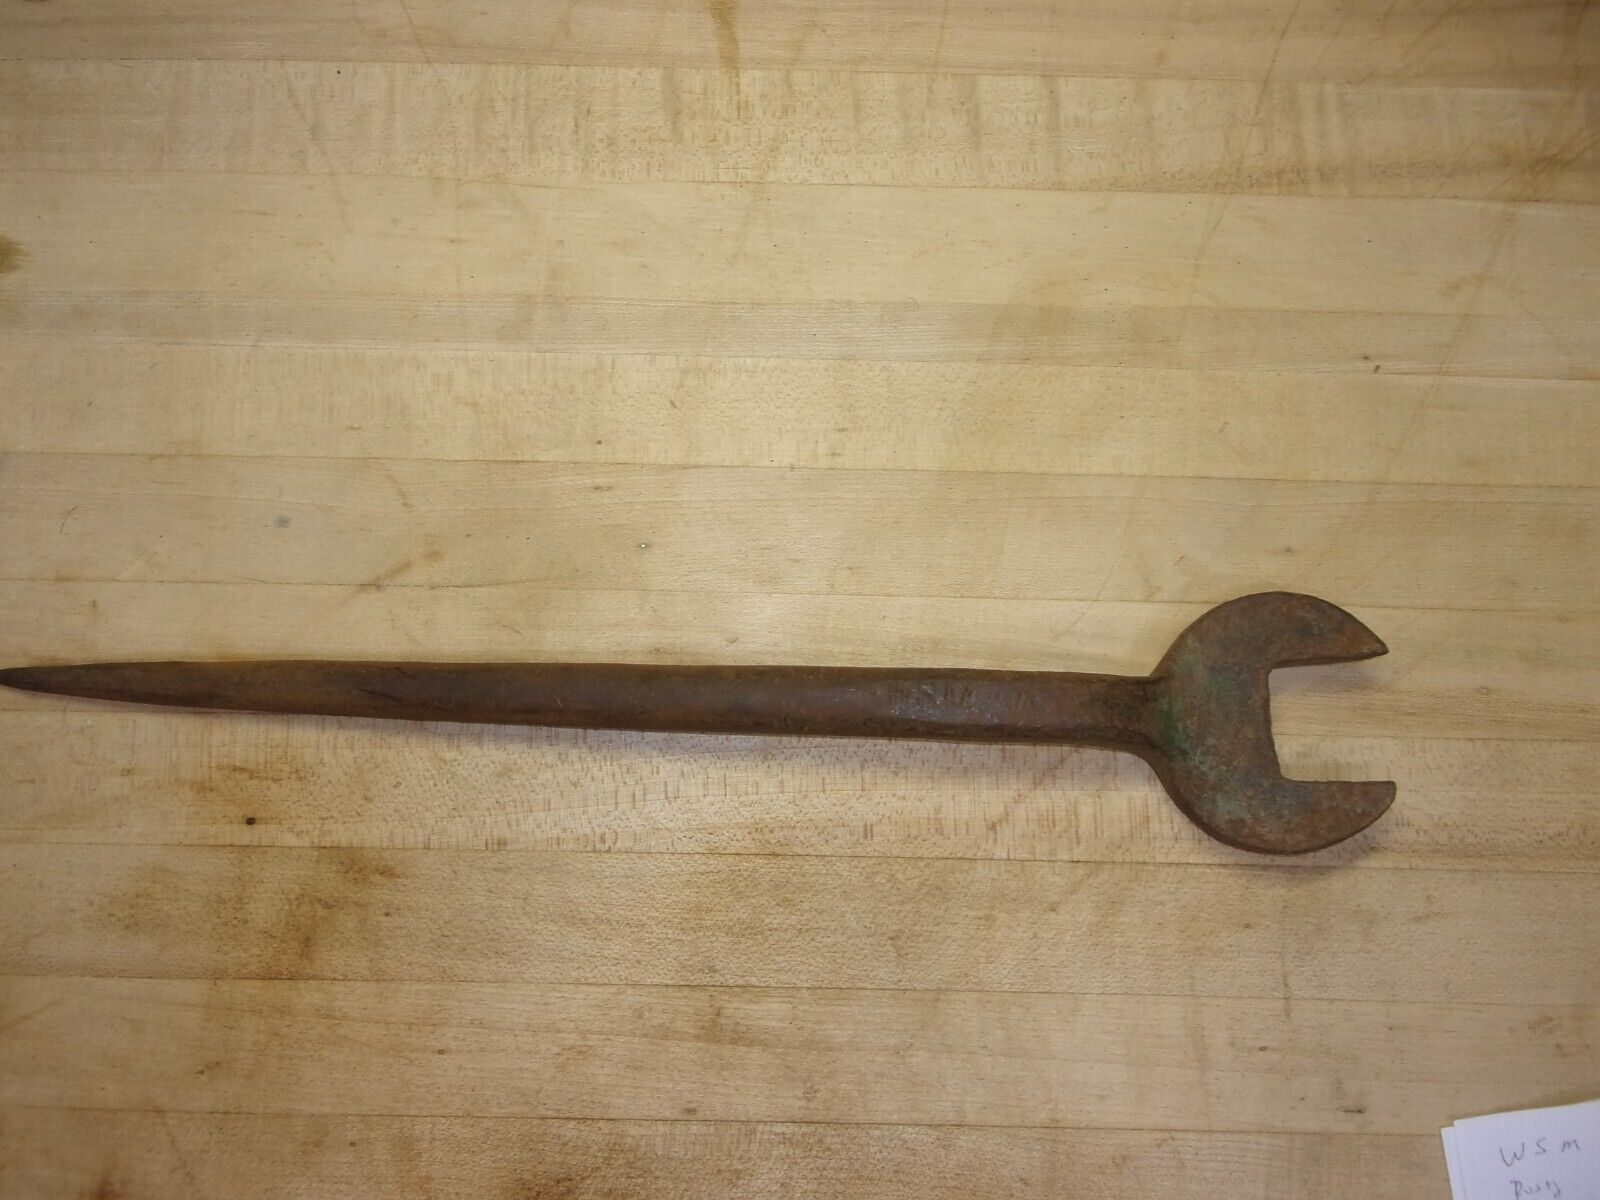 Antique Large Spud Wrench Offset Marked W S M 18\